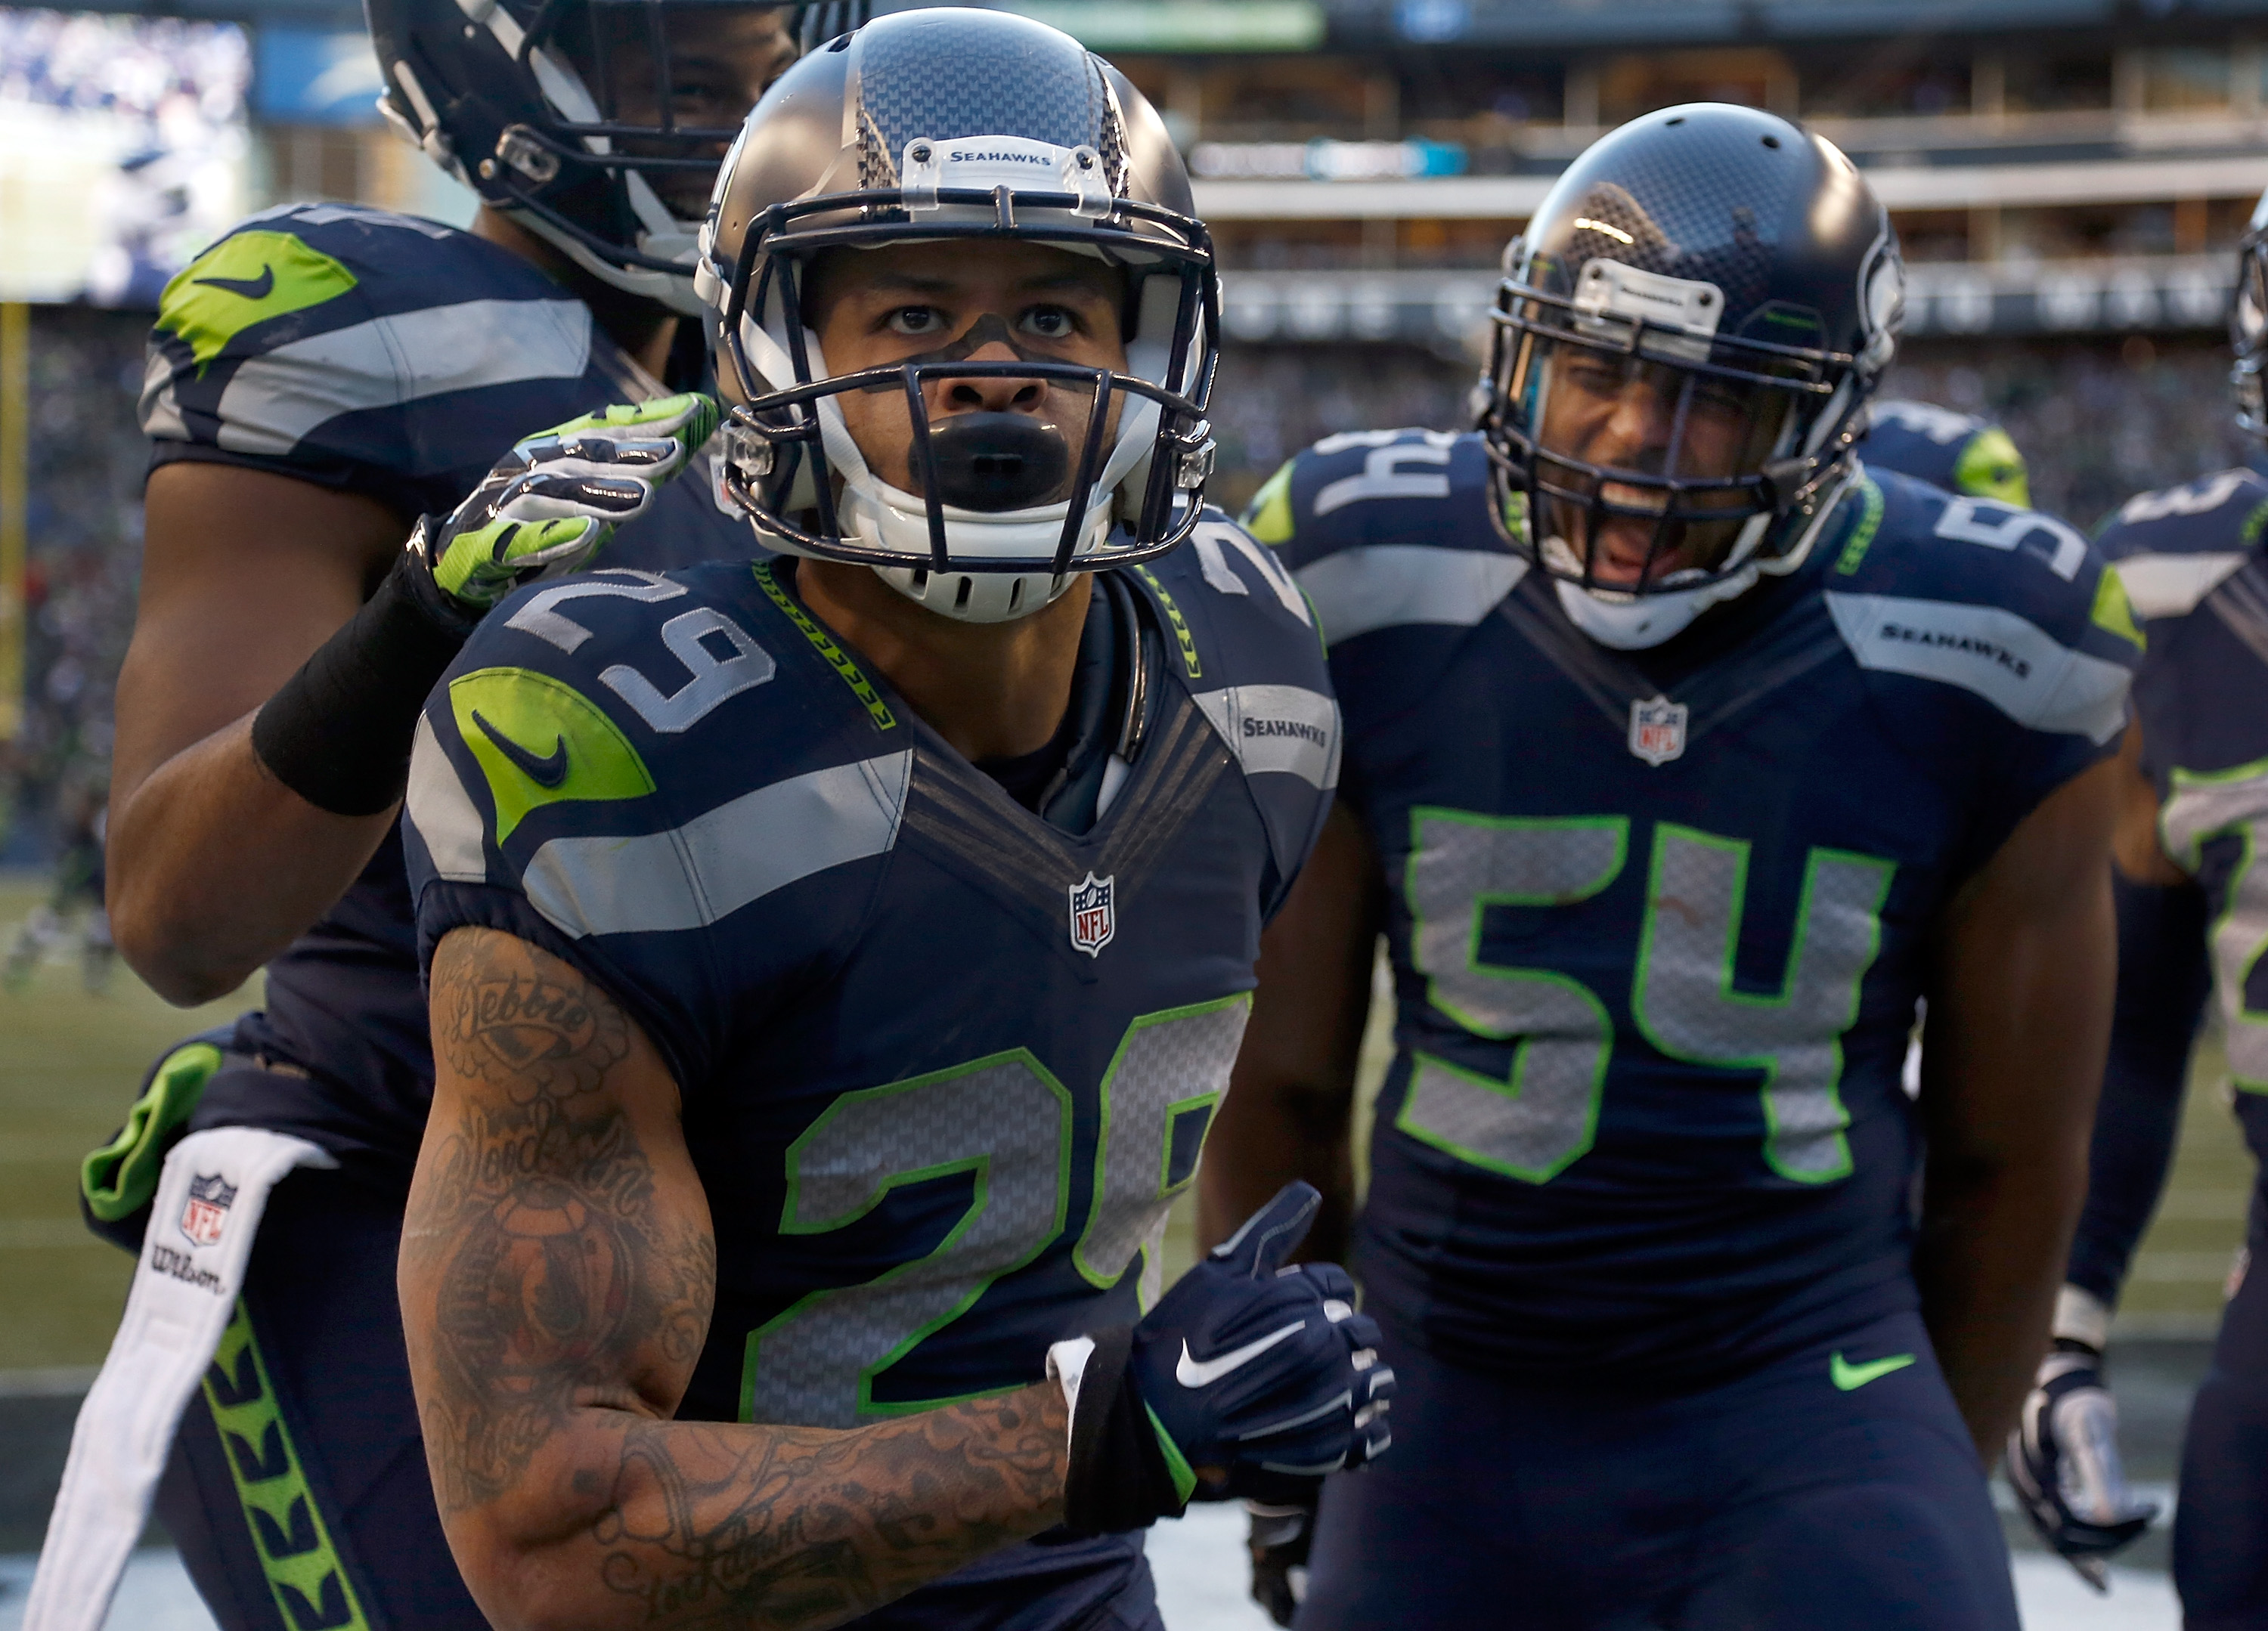 Bobby Wagner on Earl Thomas: 'He needs to know we appreciate him'